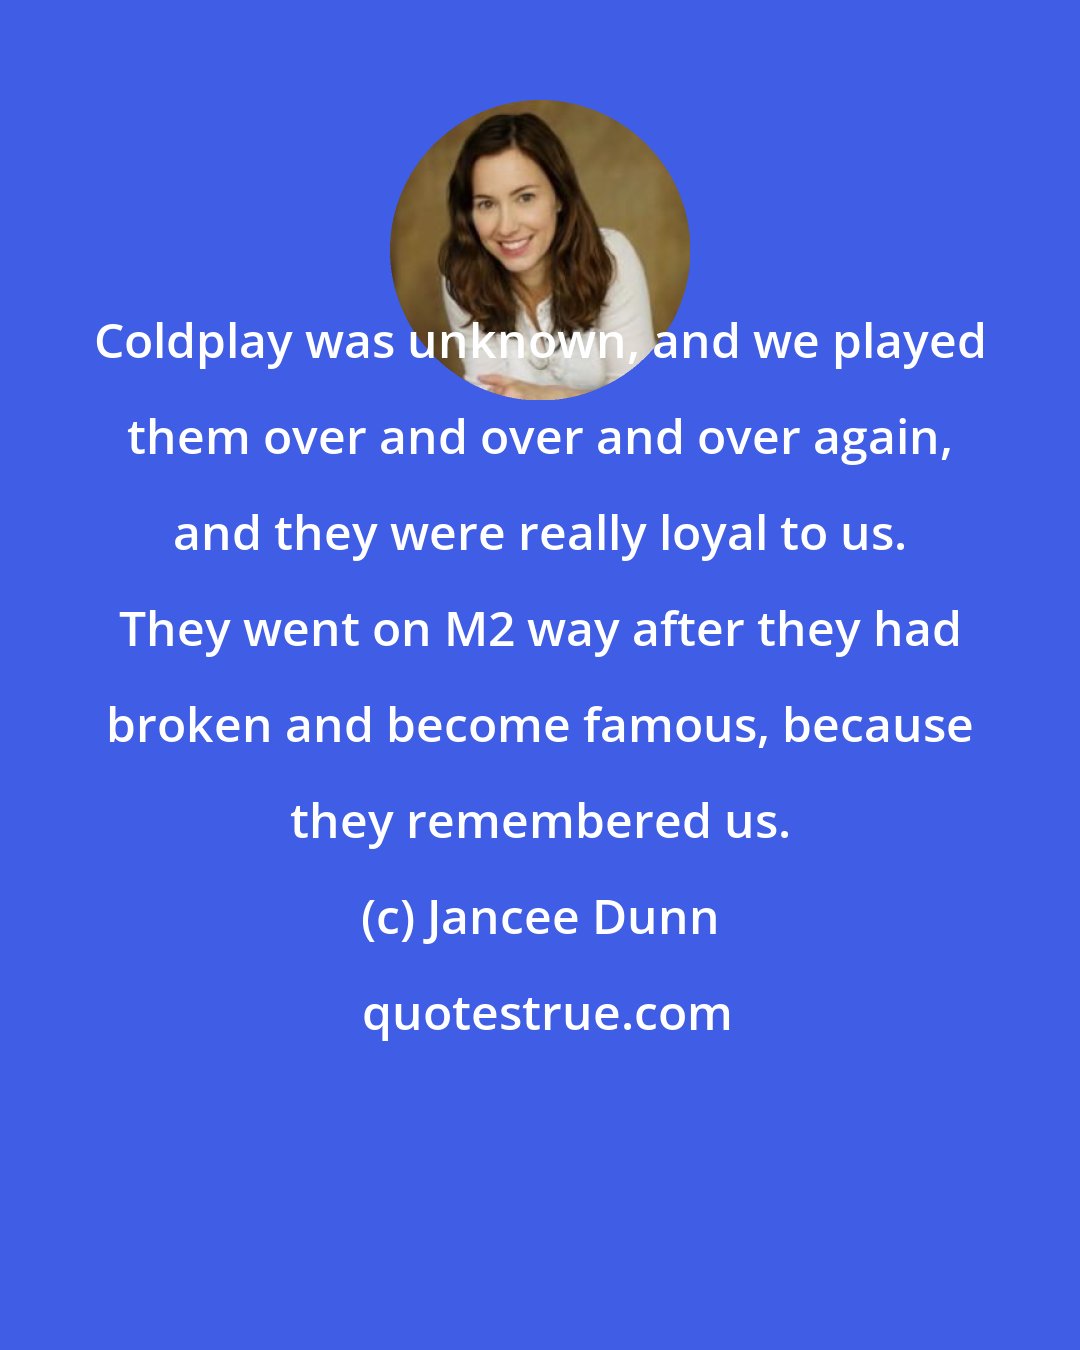 Jancee Dunn: Coldplay was unknown, and we played them over and over and over again, and they were really loyal to us. They went on M2 way after they had broken and become famous, because they remembered us.